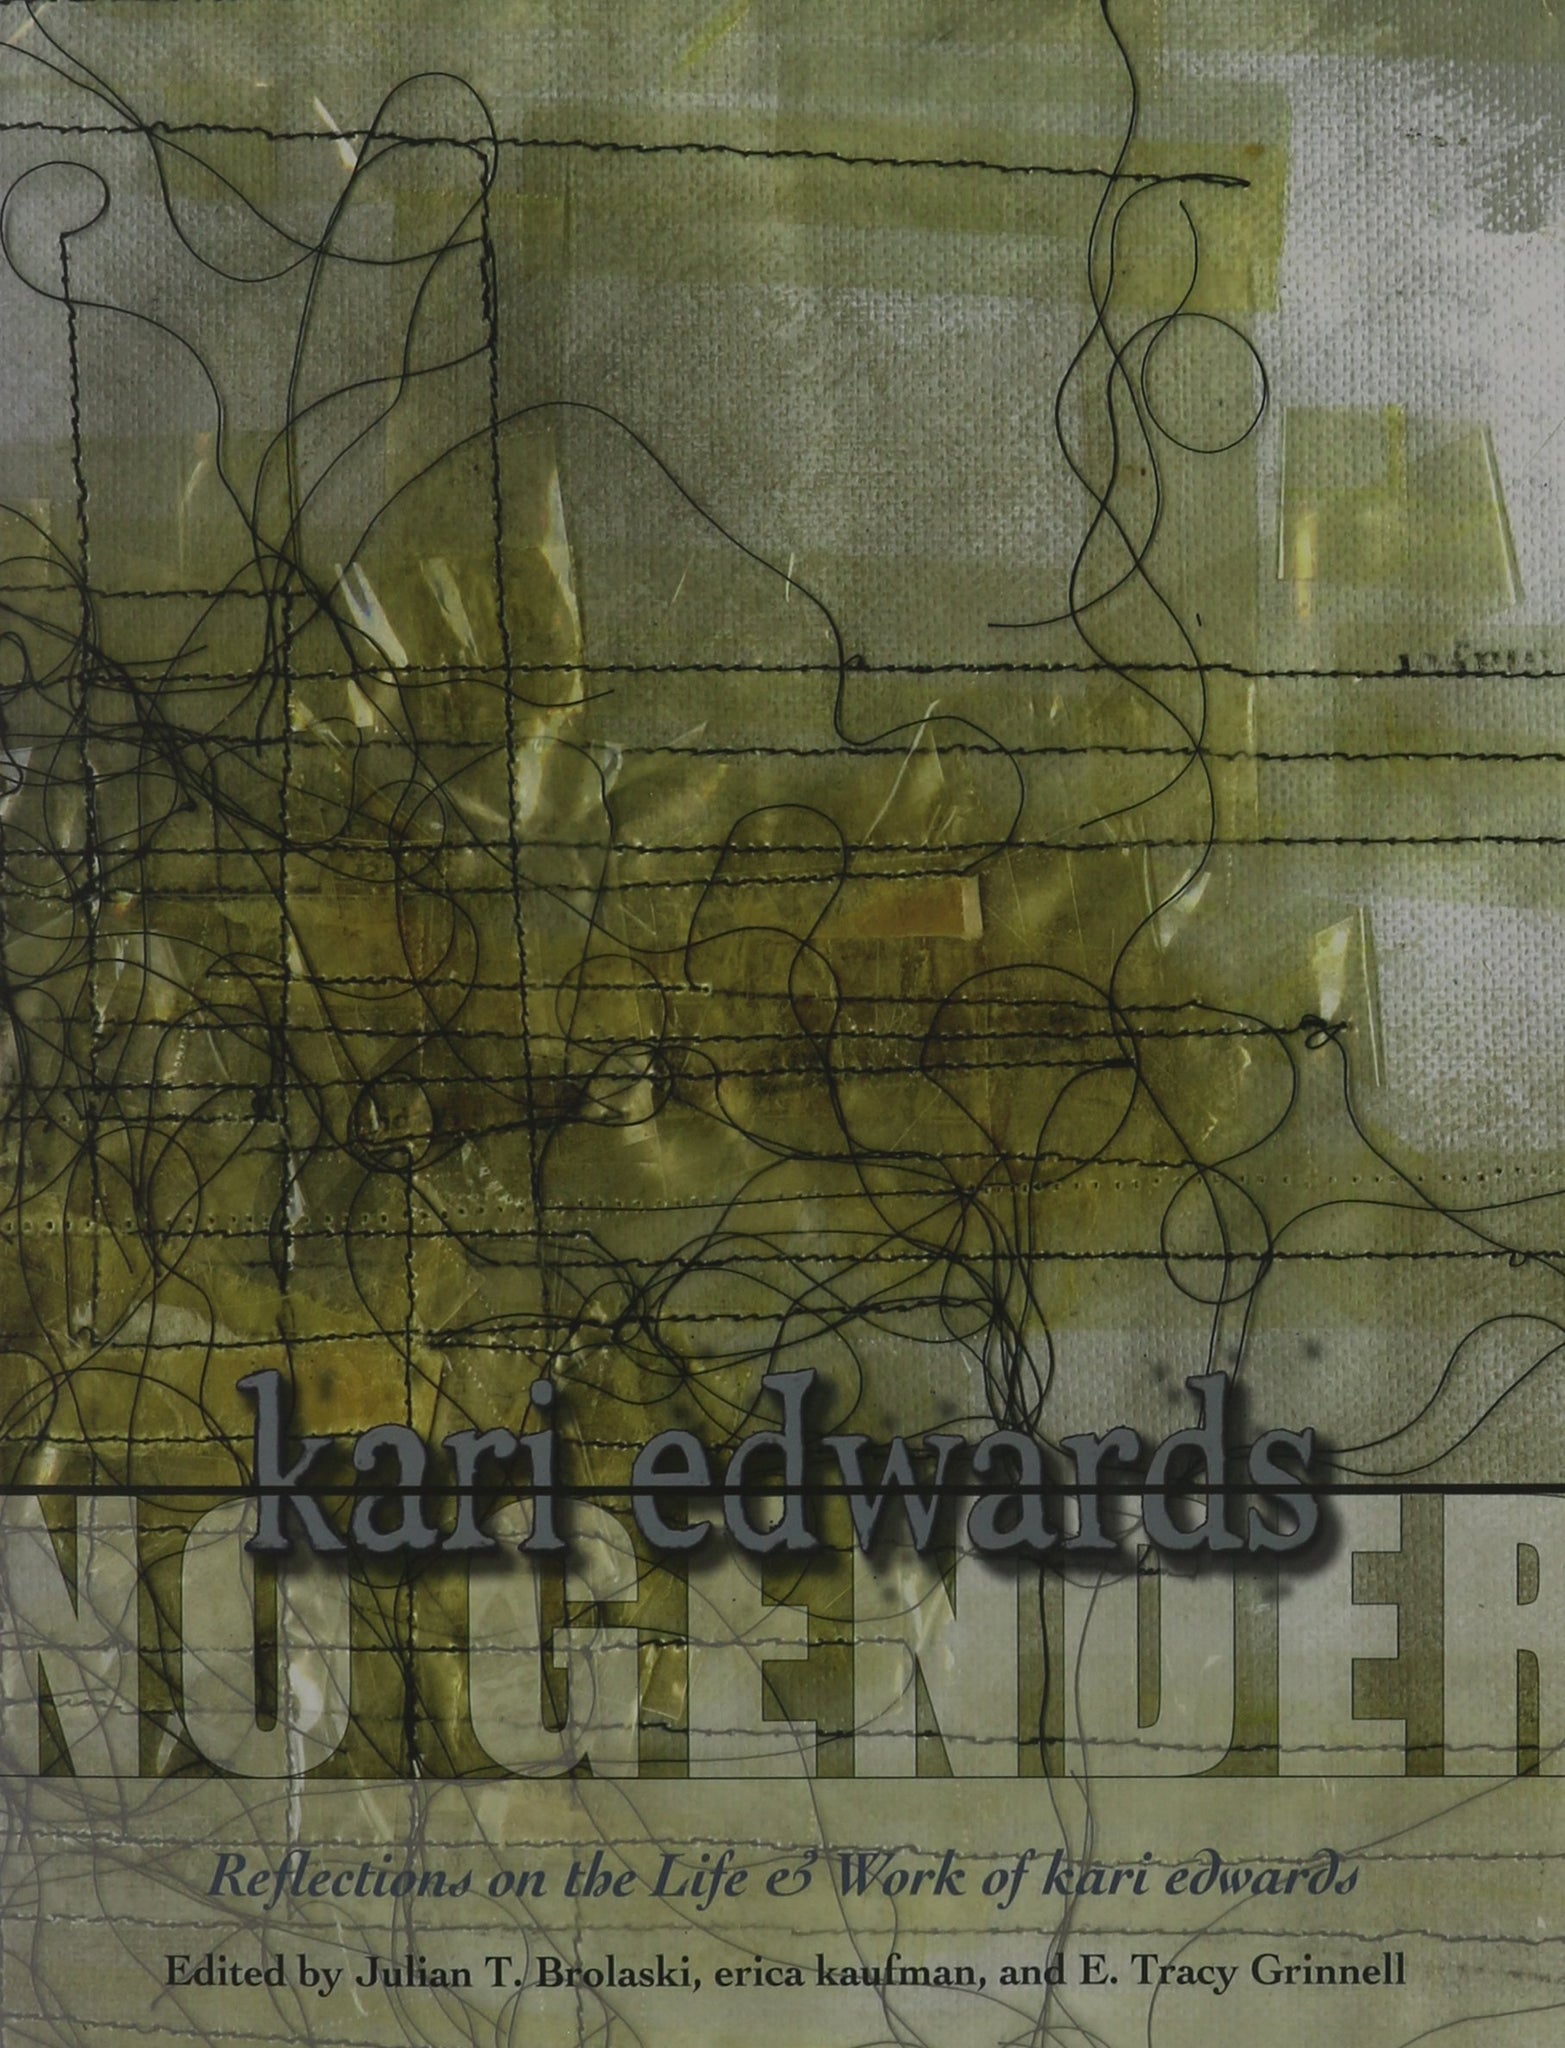 NO GENDER: Reflections on the Life & Work of kari edwards